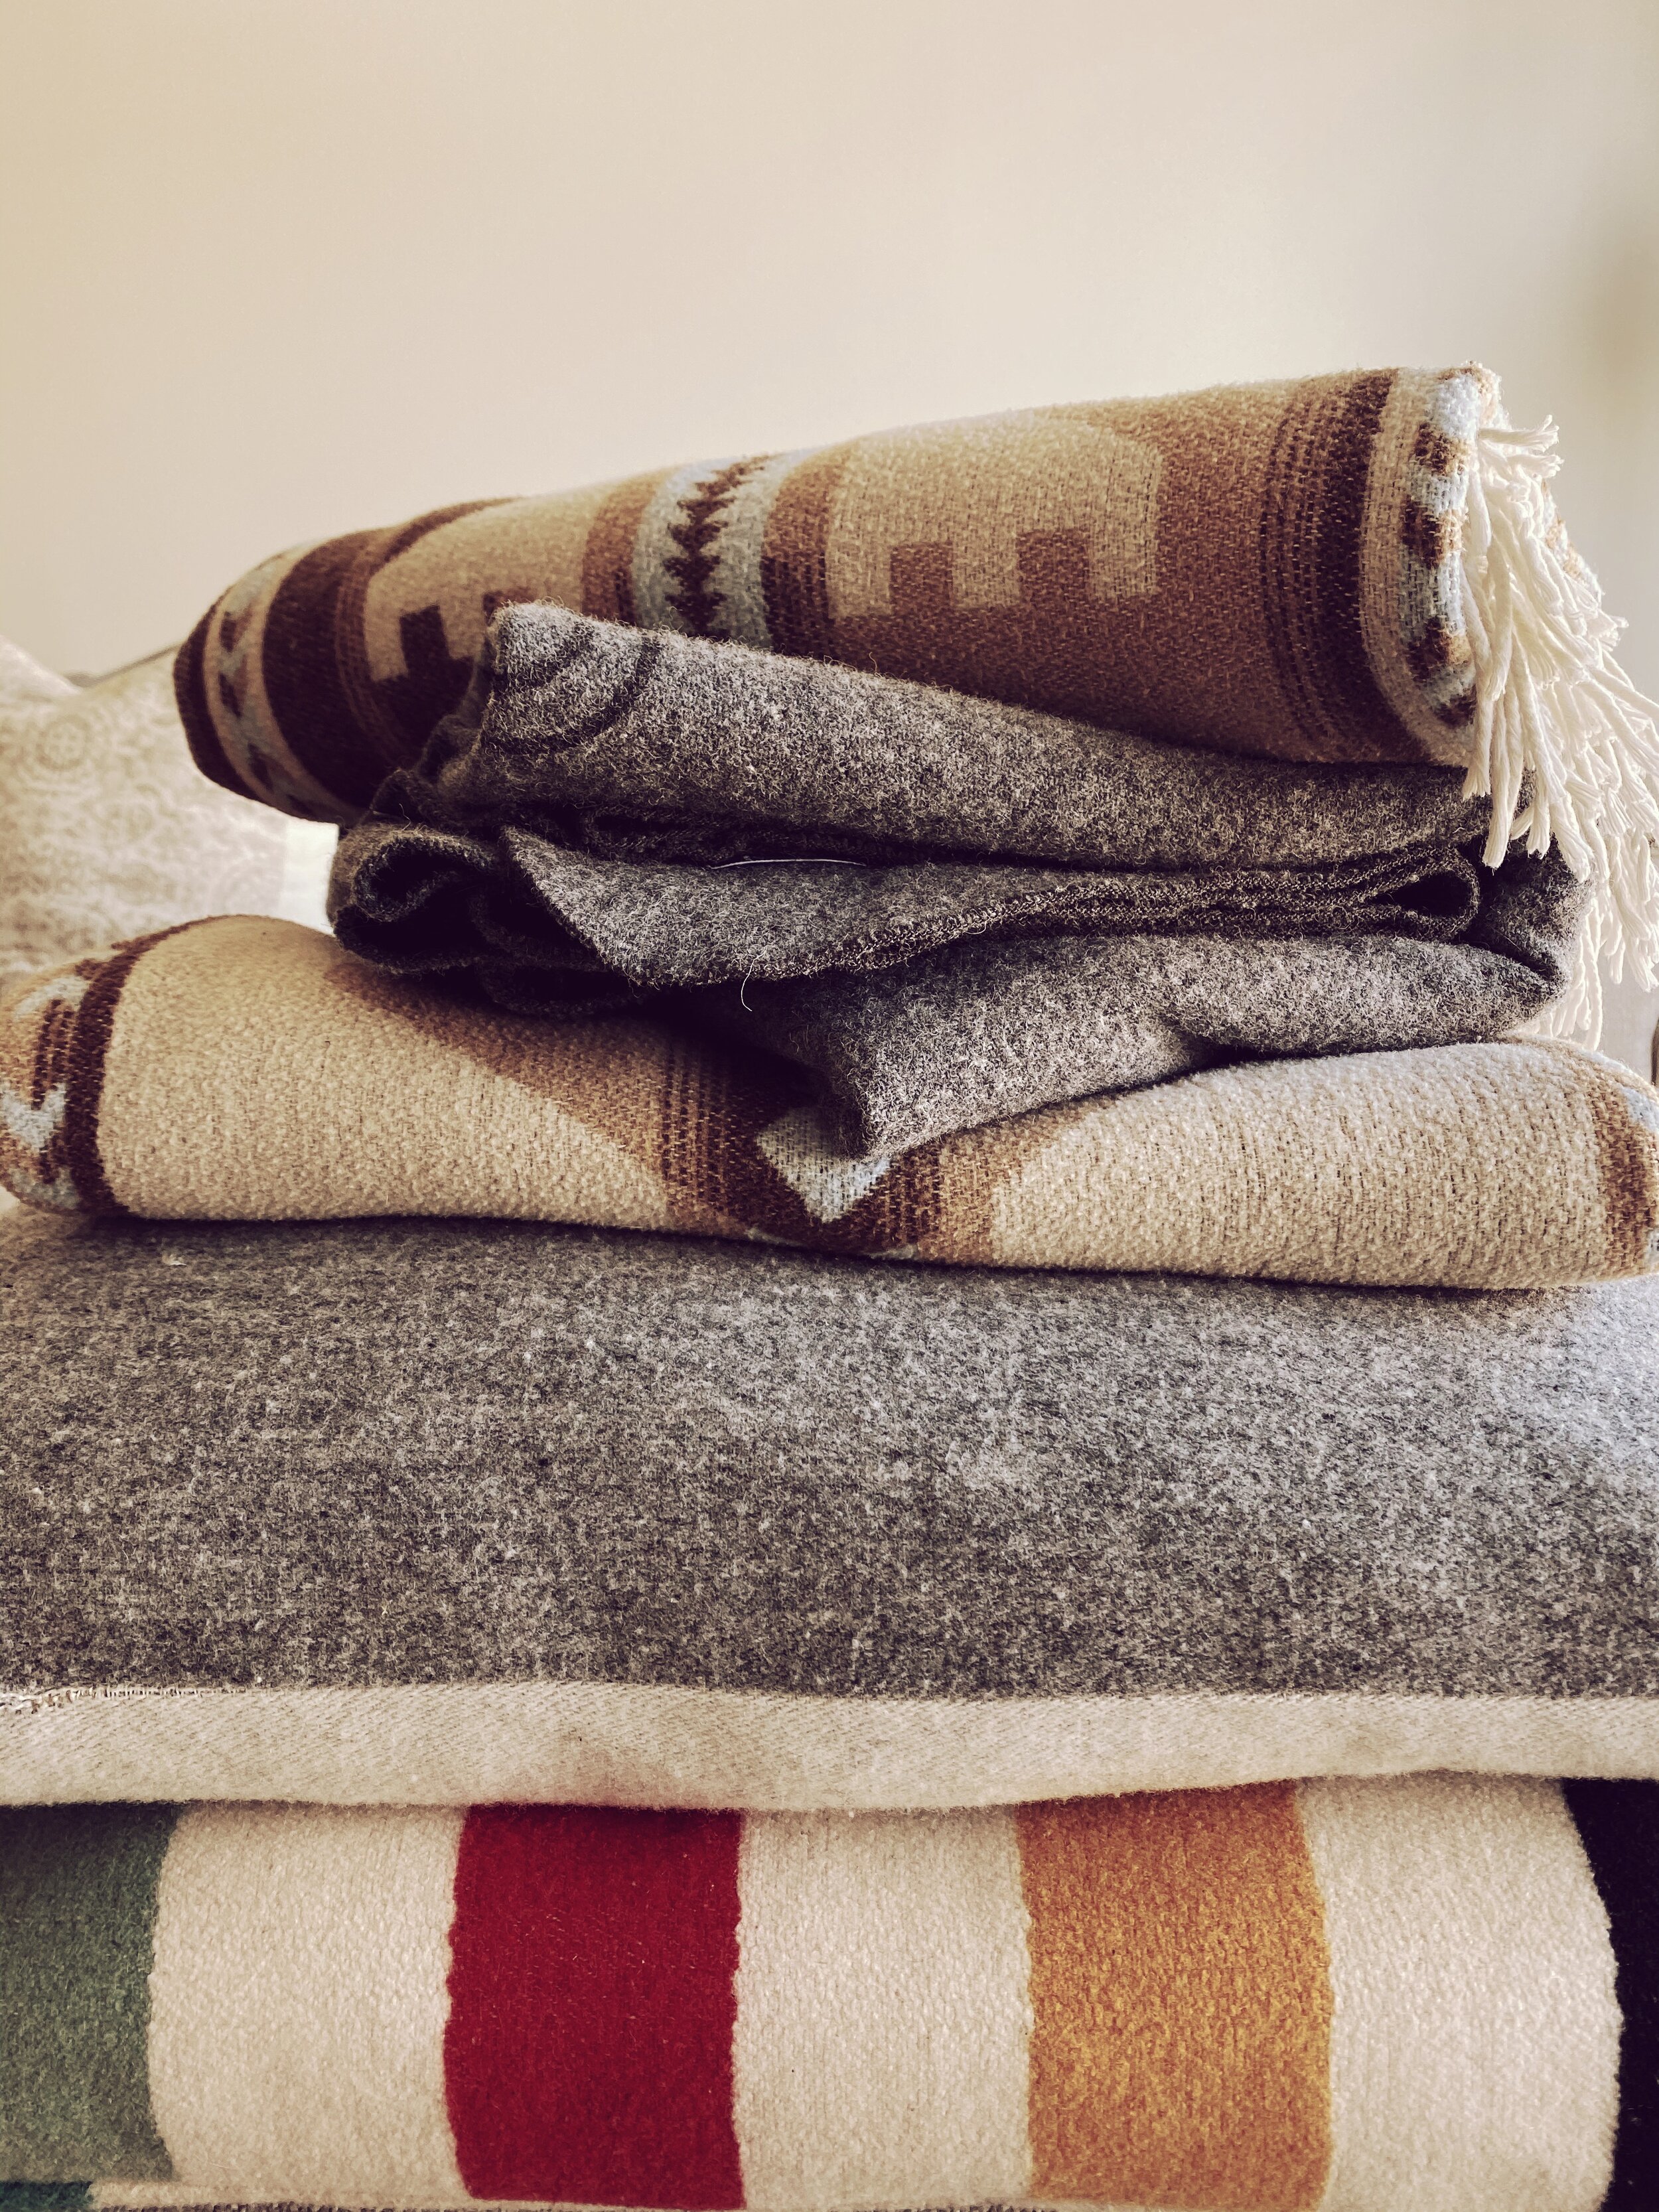 Stack of Wool Blankets, Sackcloth and Ashes, Faribault Woolen Mill